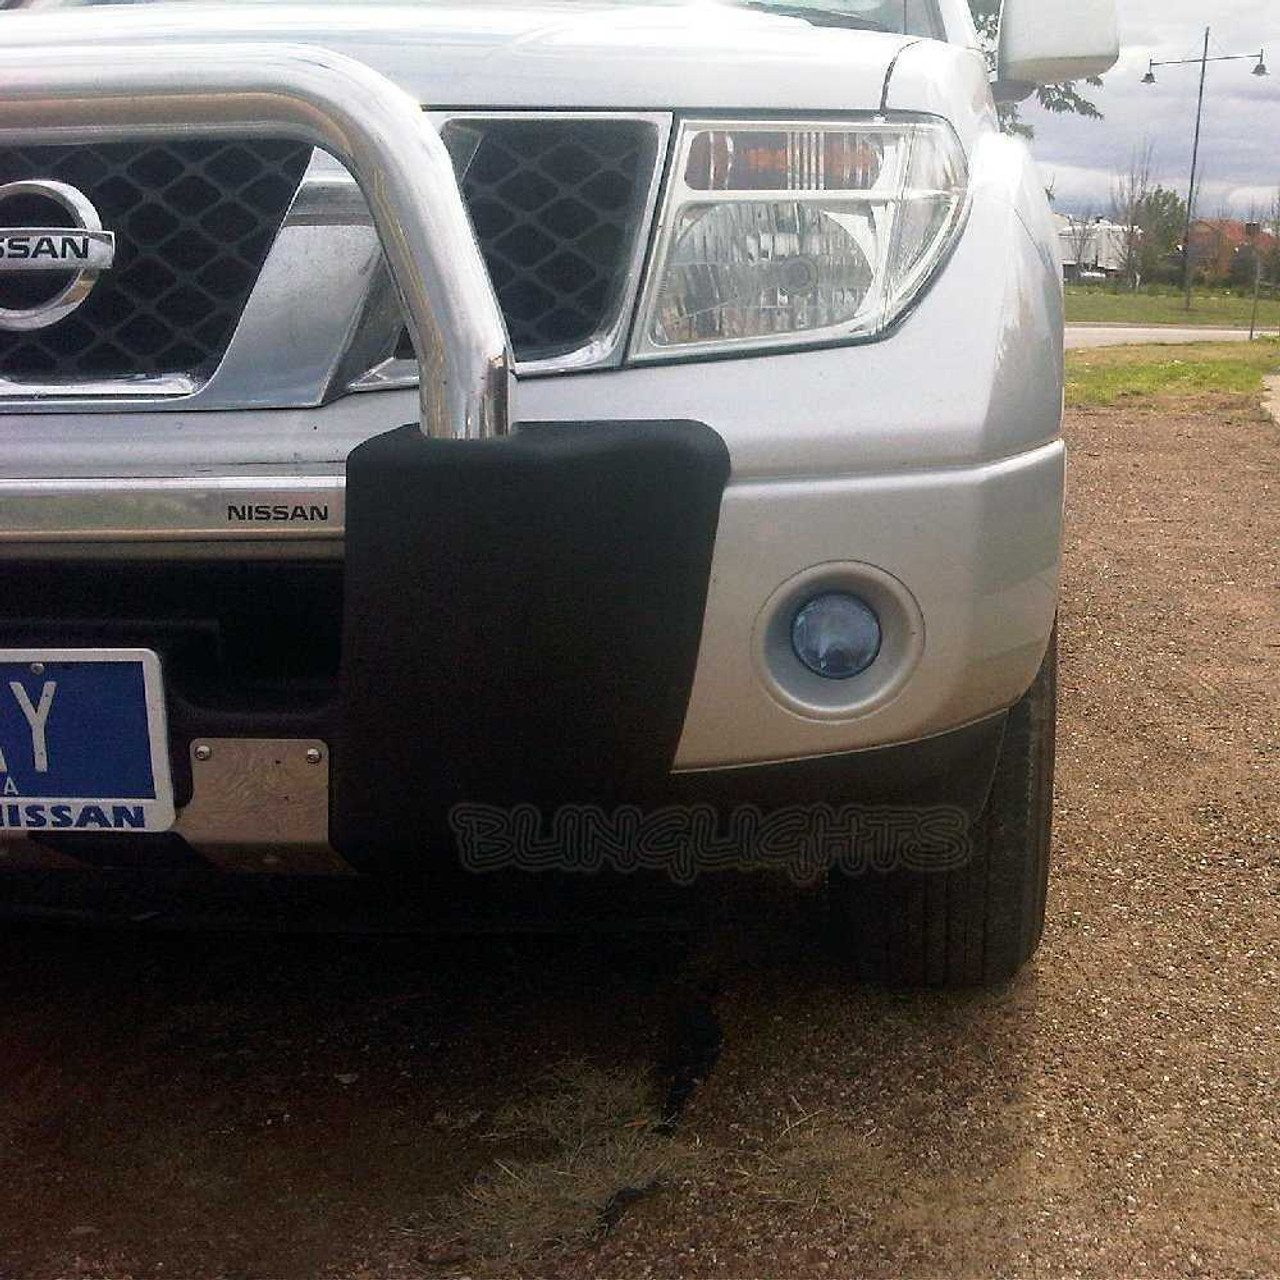 BlingLights Brand Fog Lights compatible with 2005-2012 Nissan Terrano R51